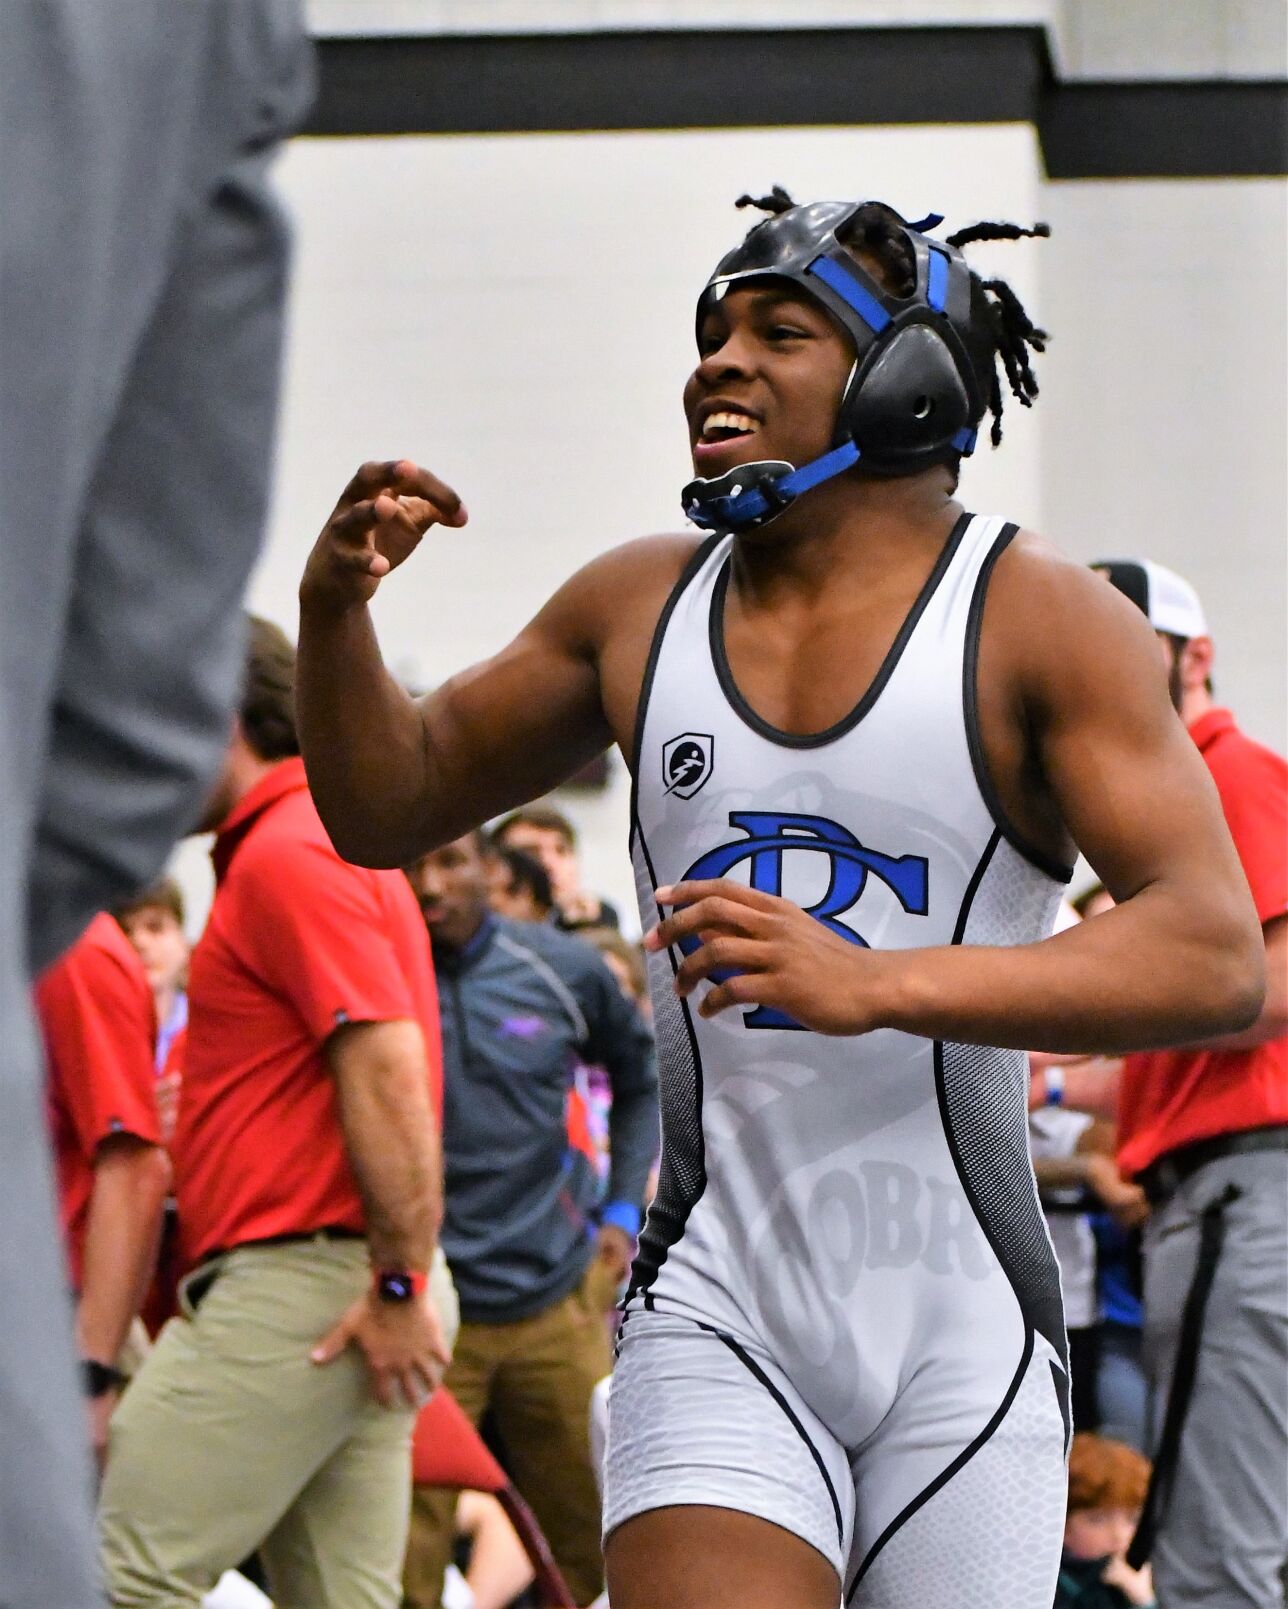 PERFORMANCE OF THE YEAR: Peace dominated on mat at state